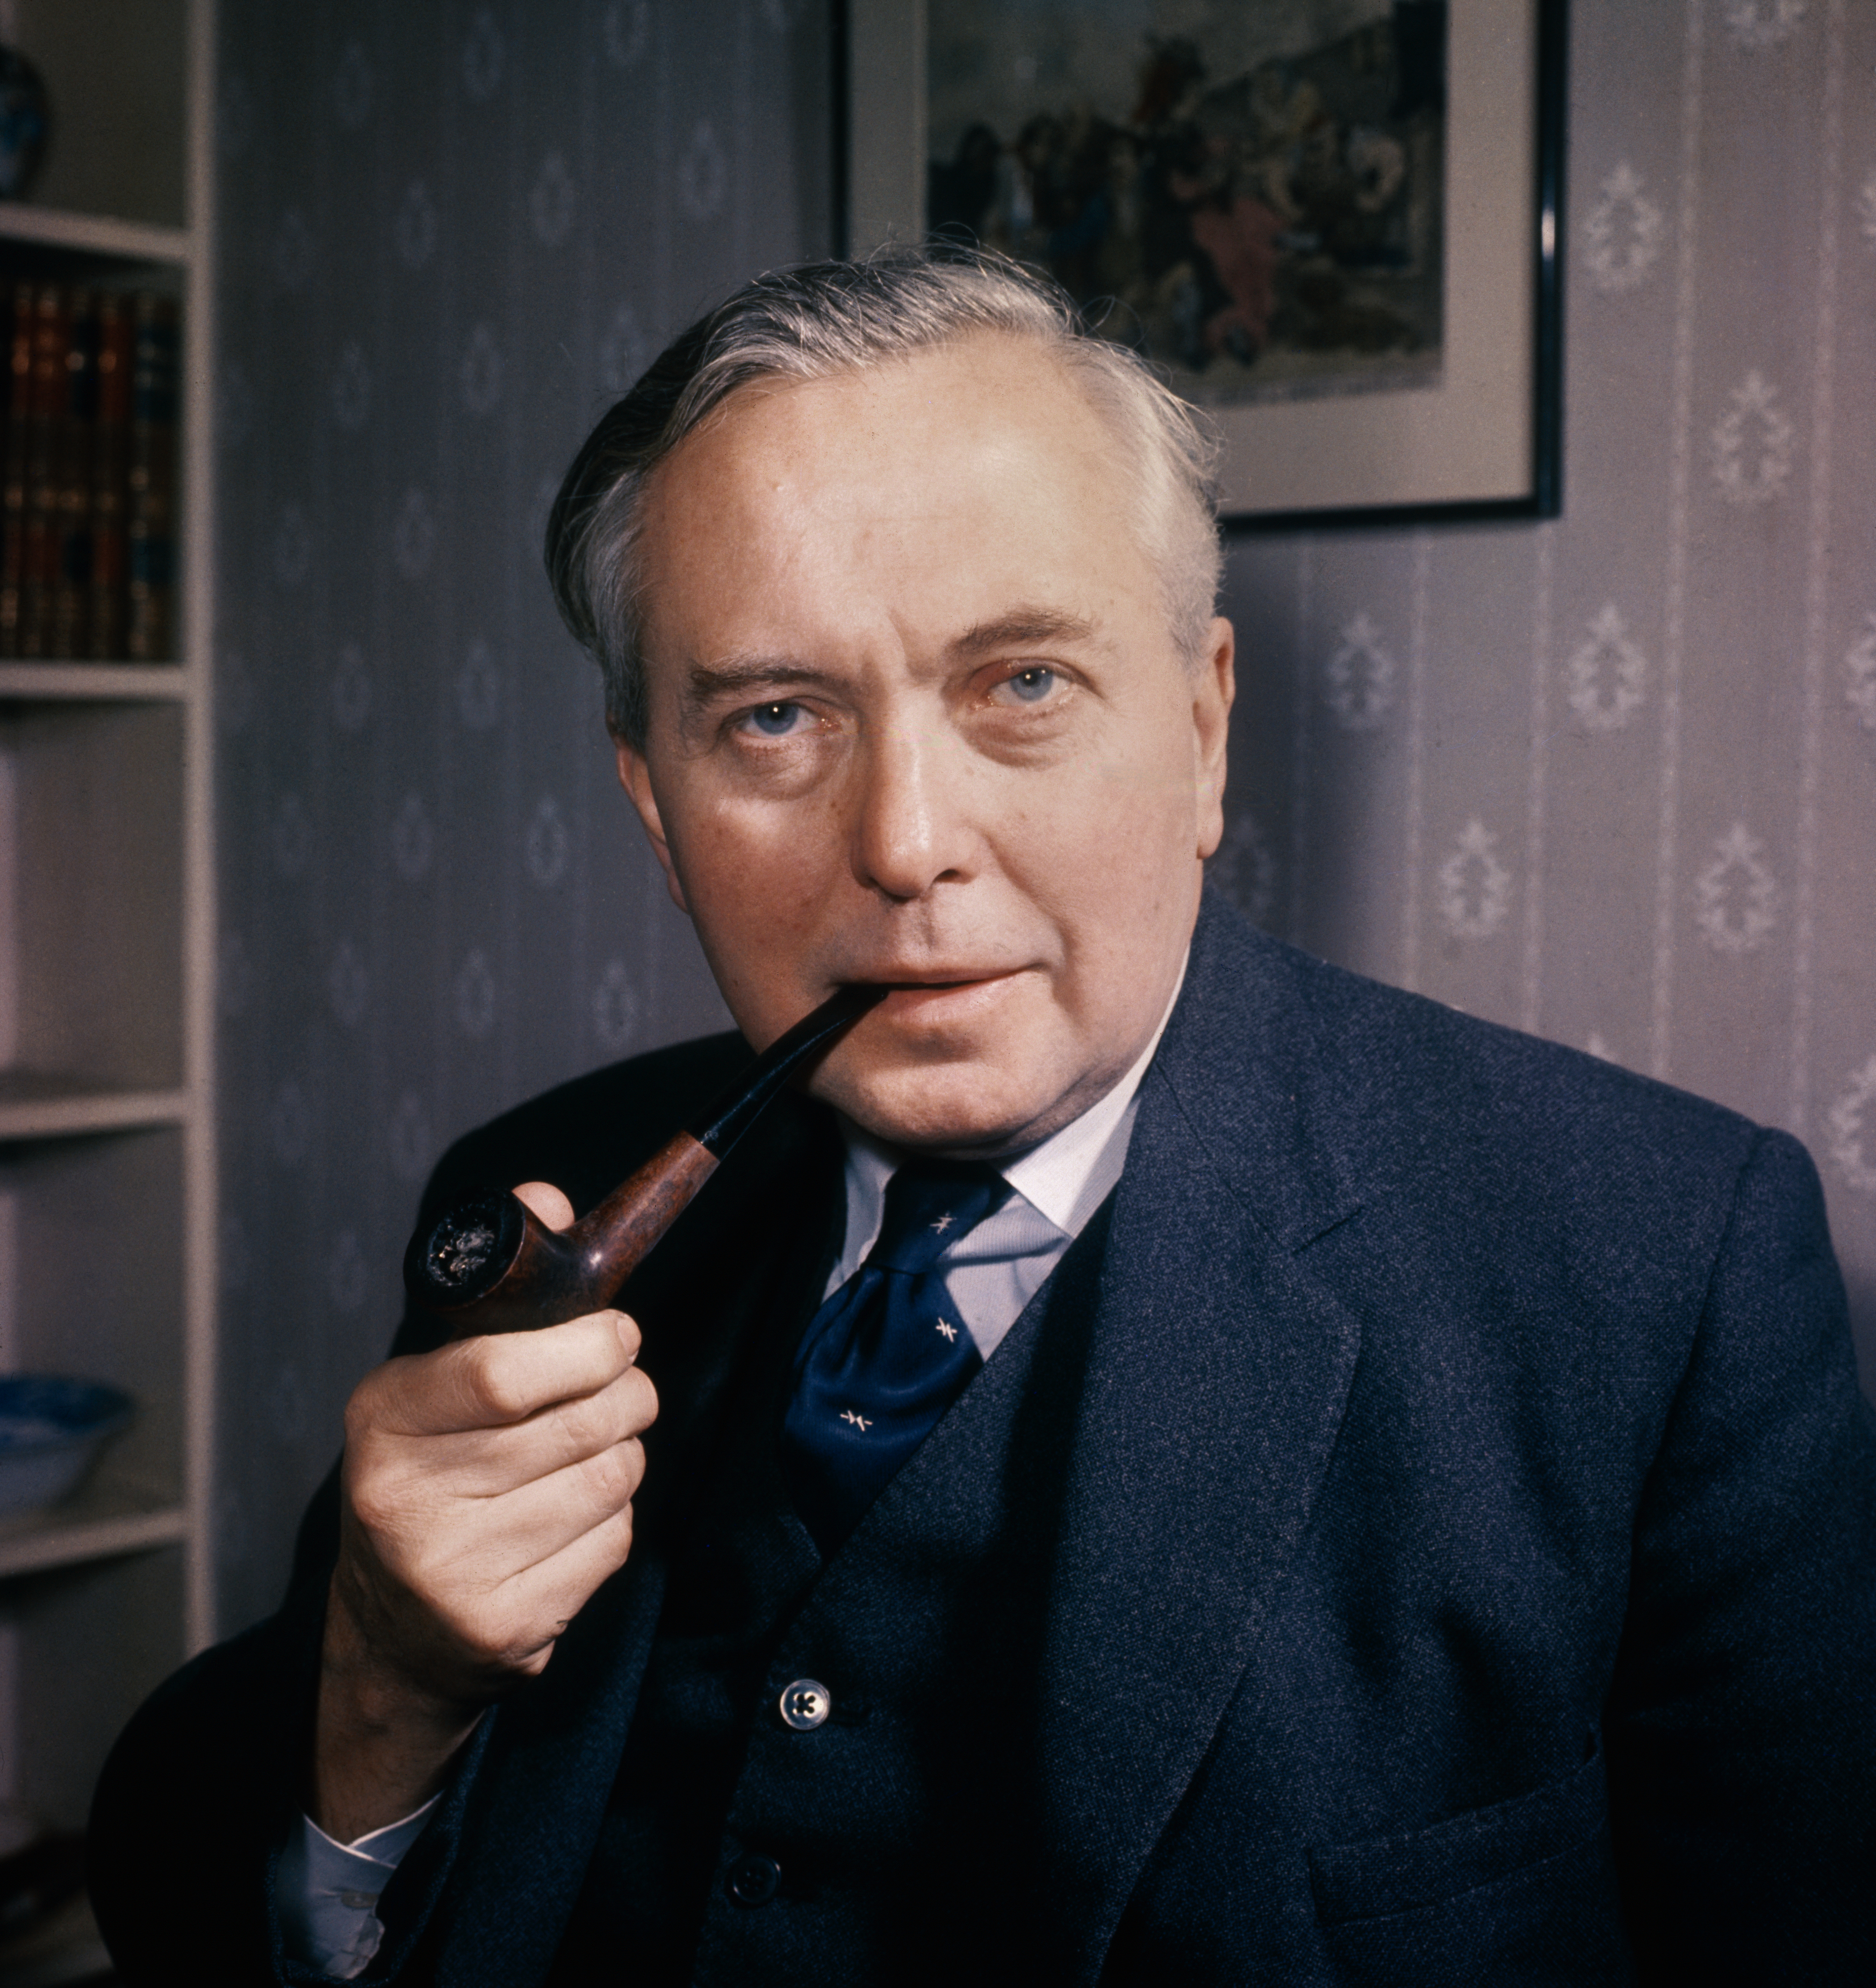 Harold Wilson, a former Labour prime minister, confessed to an affair with an aide during his time in Downing Street